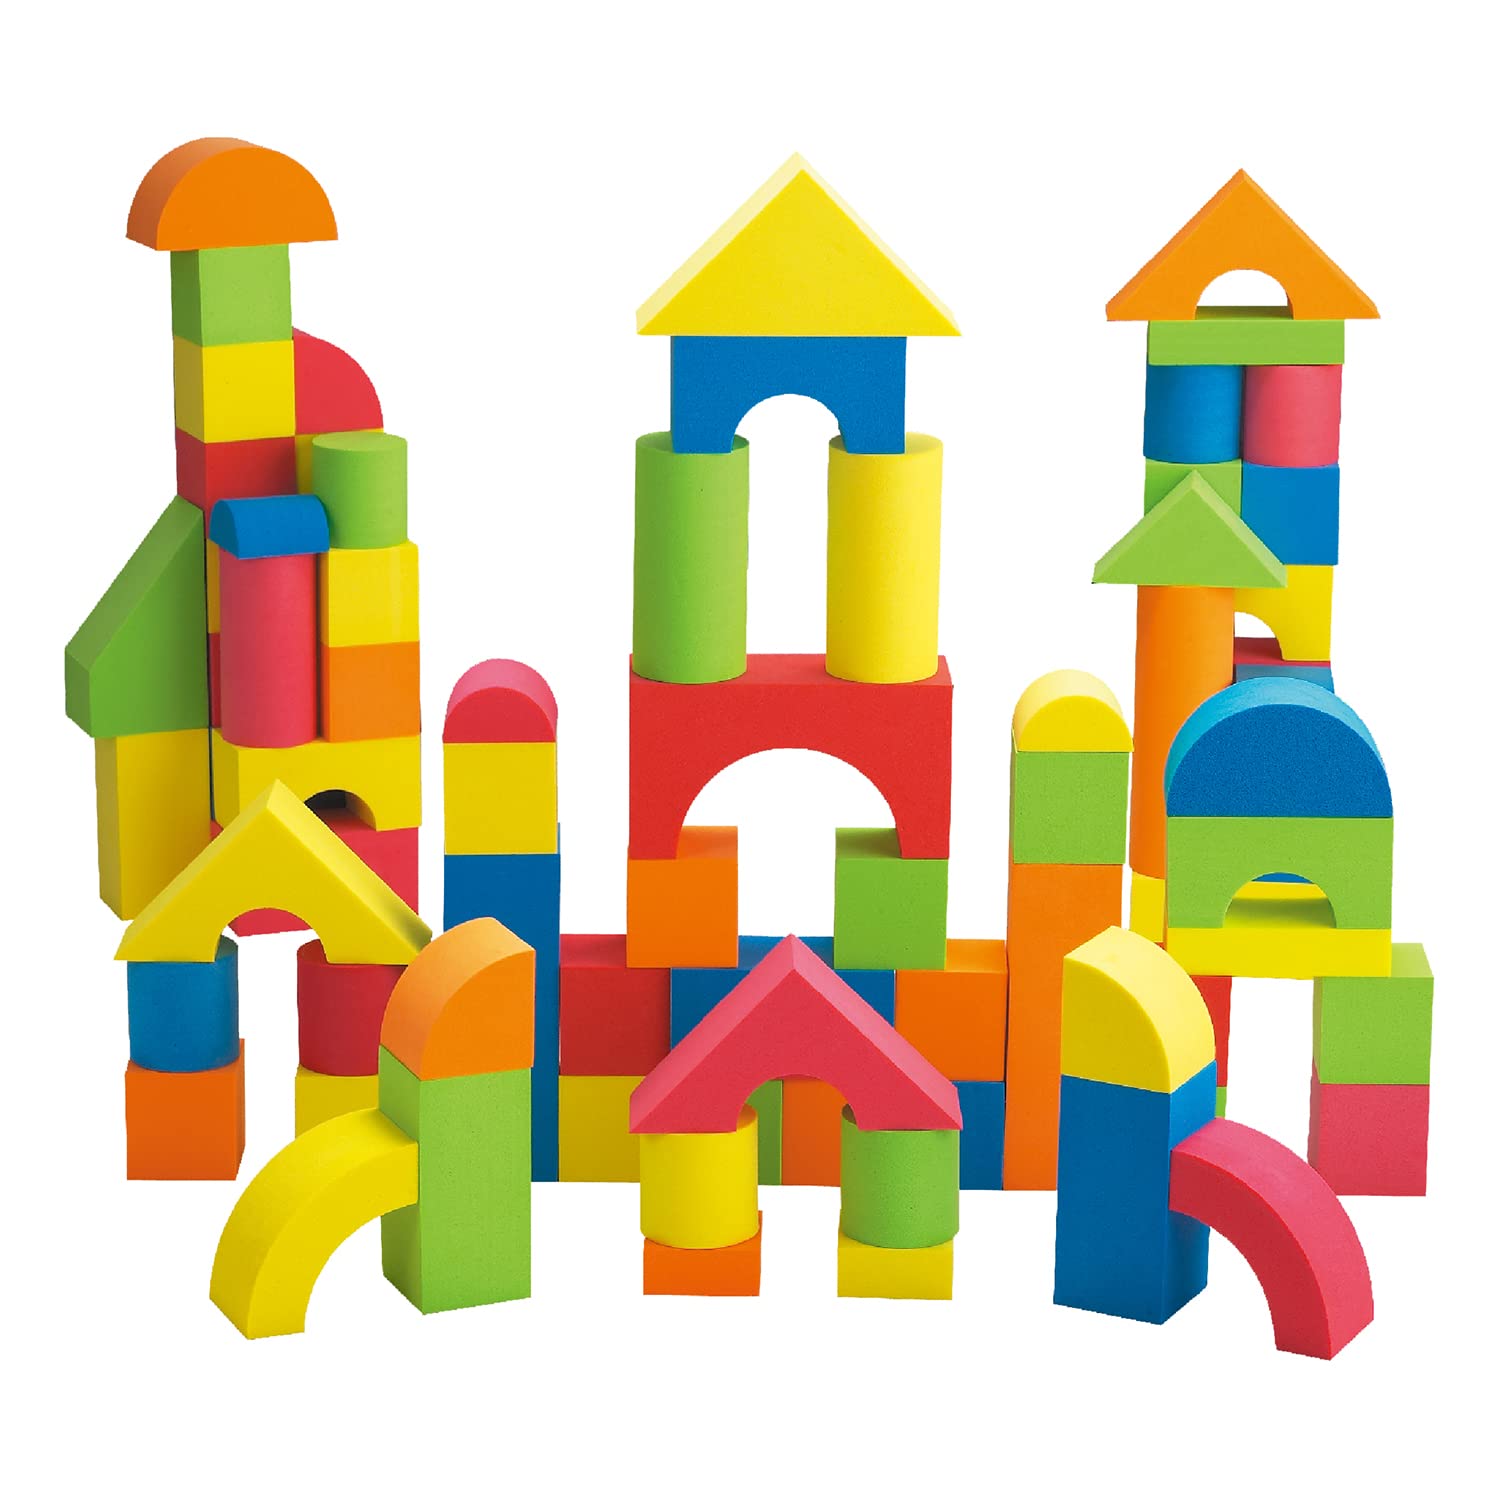 Foam Building Blocks for Toddlers 2-4, 41 Pieces EVA Soft Stacking Blocks, Baby Bath Foam Toy Set, Early Learning Construction Toys & Gifts for Kids, Boys & Girls 18+ Months